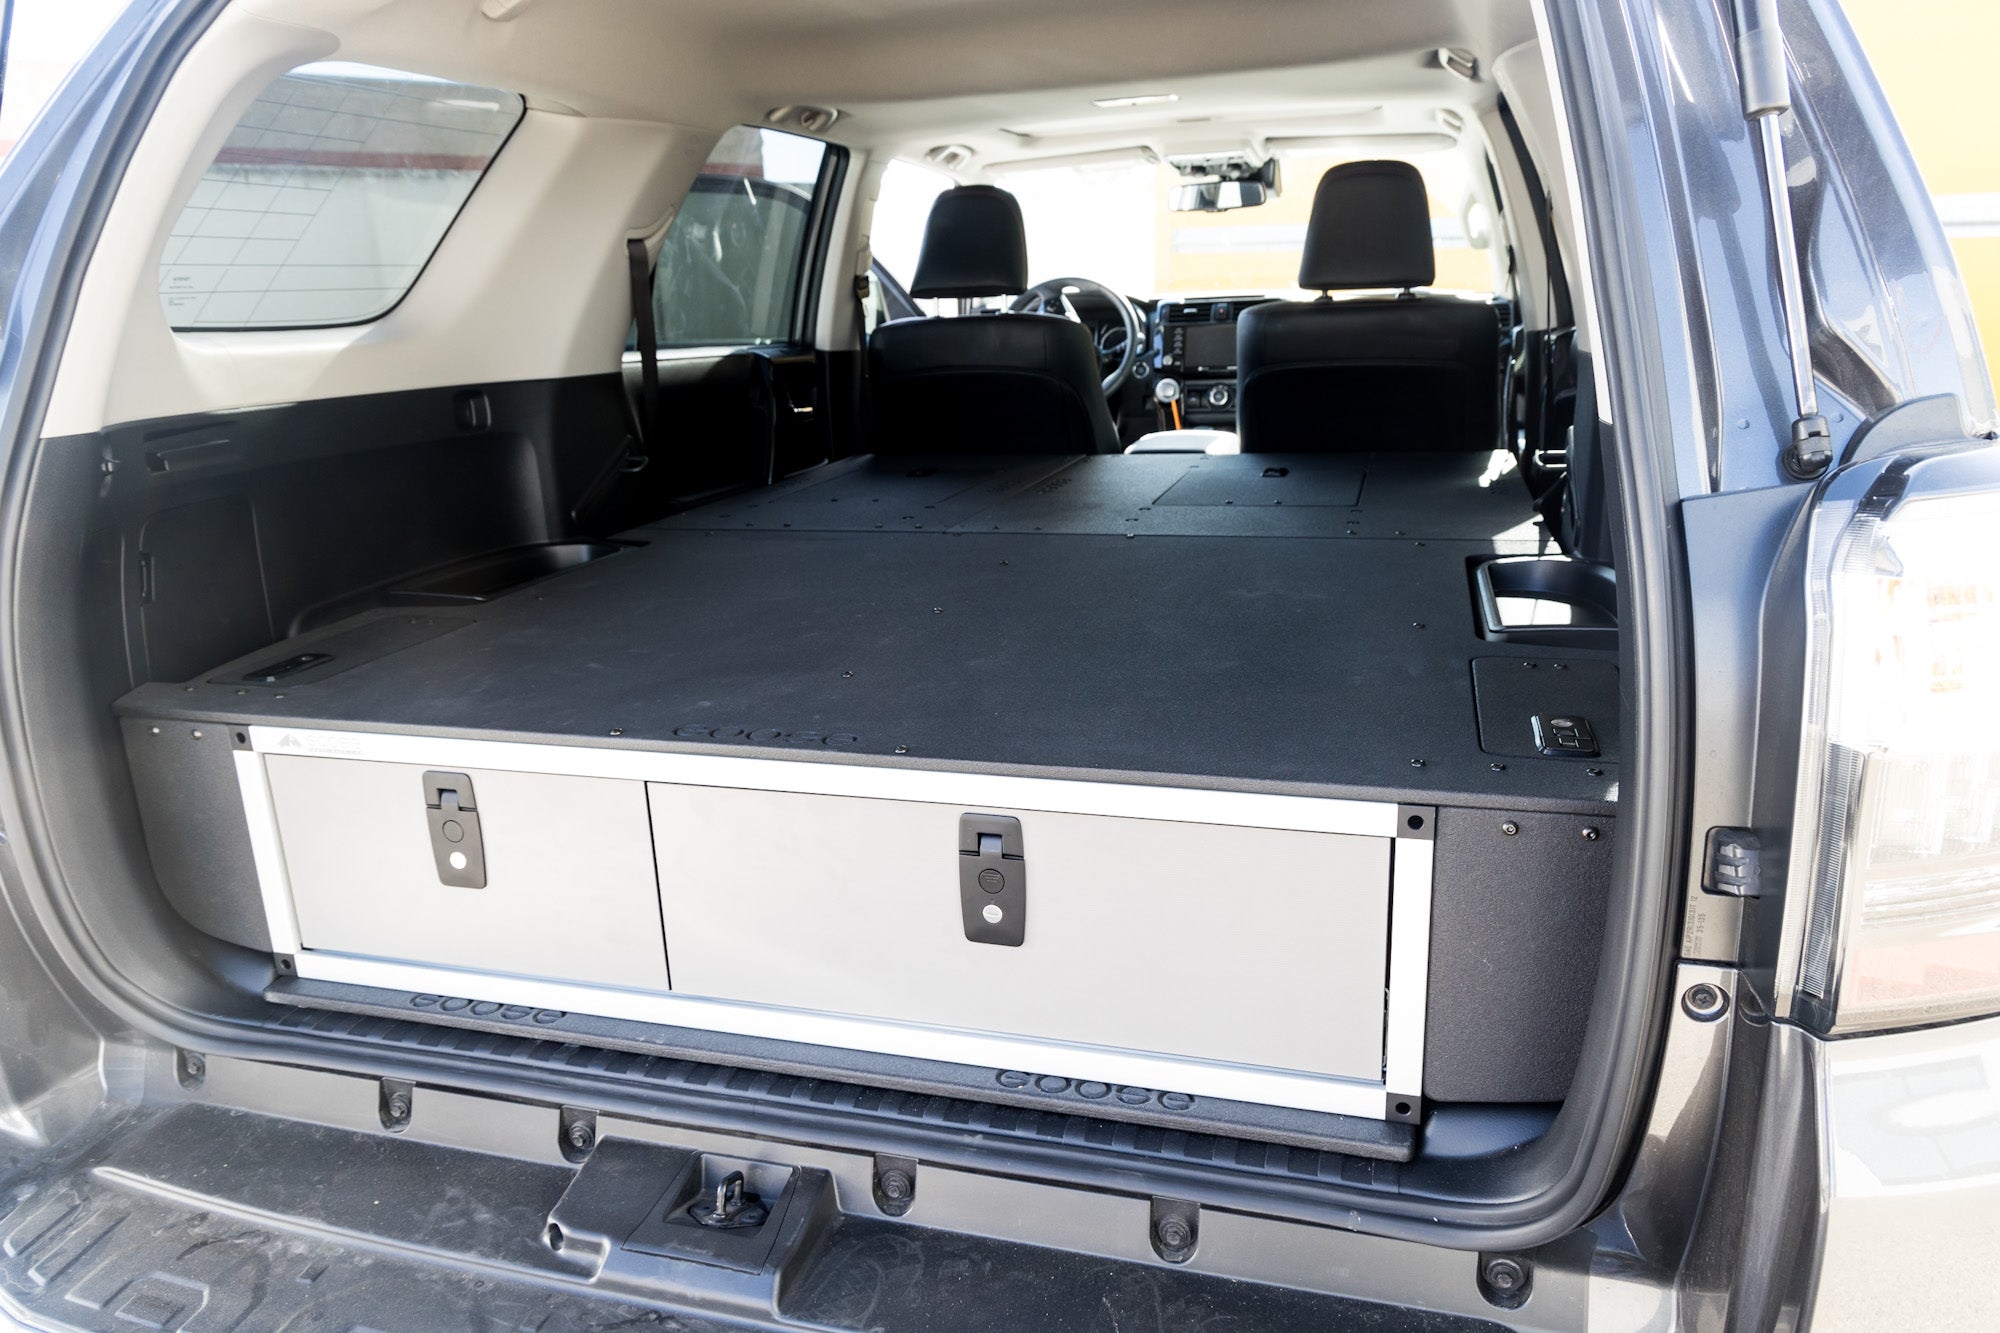 Goose Gear Stealth Sleep and Storage Package with Fitted Top Plate for Toyota 4Runner 2010-Present 5th Gen.